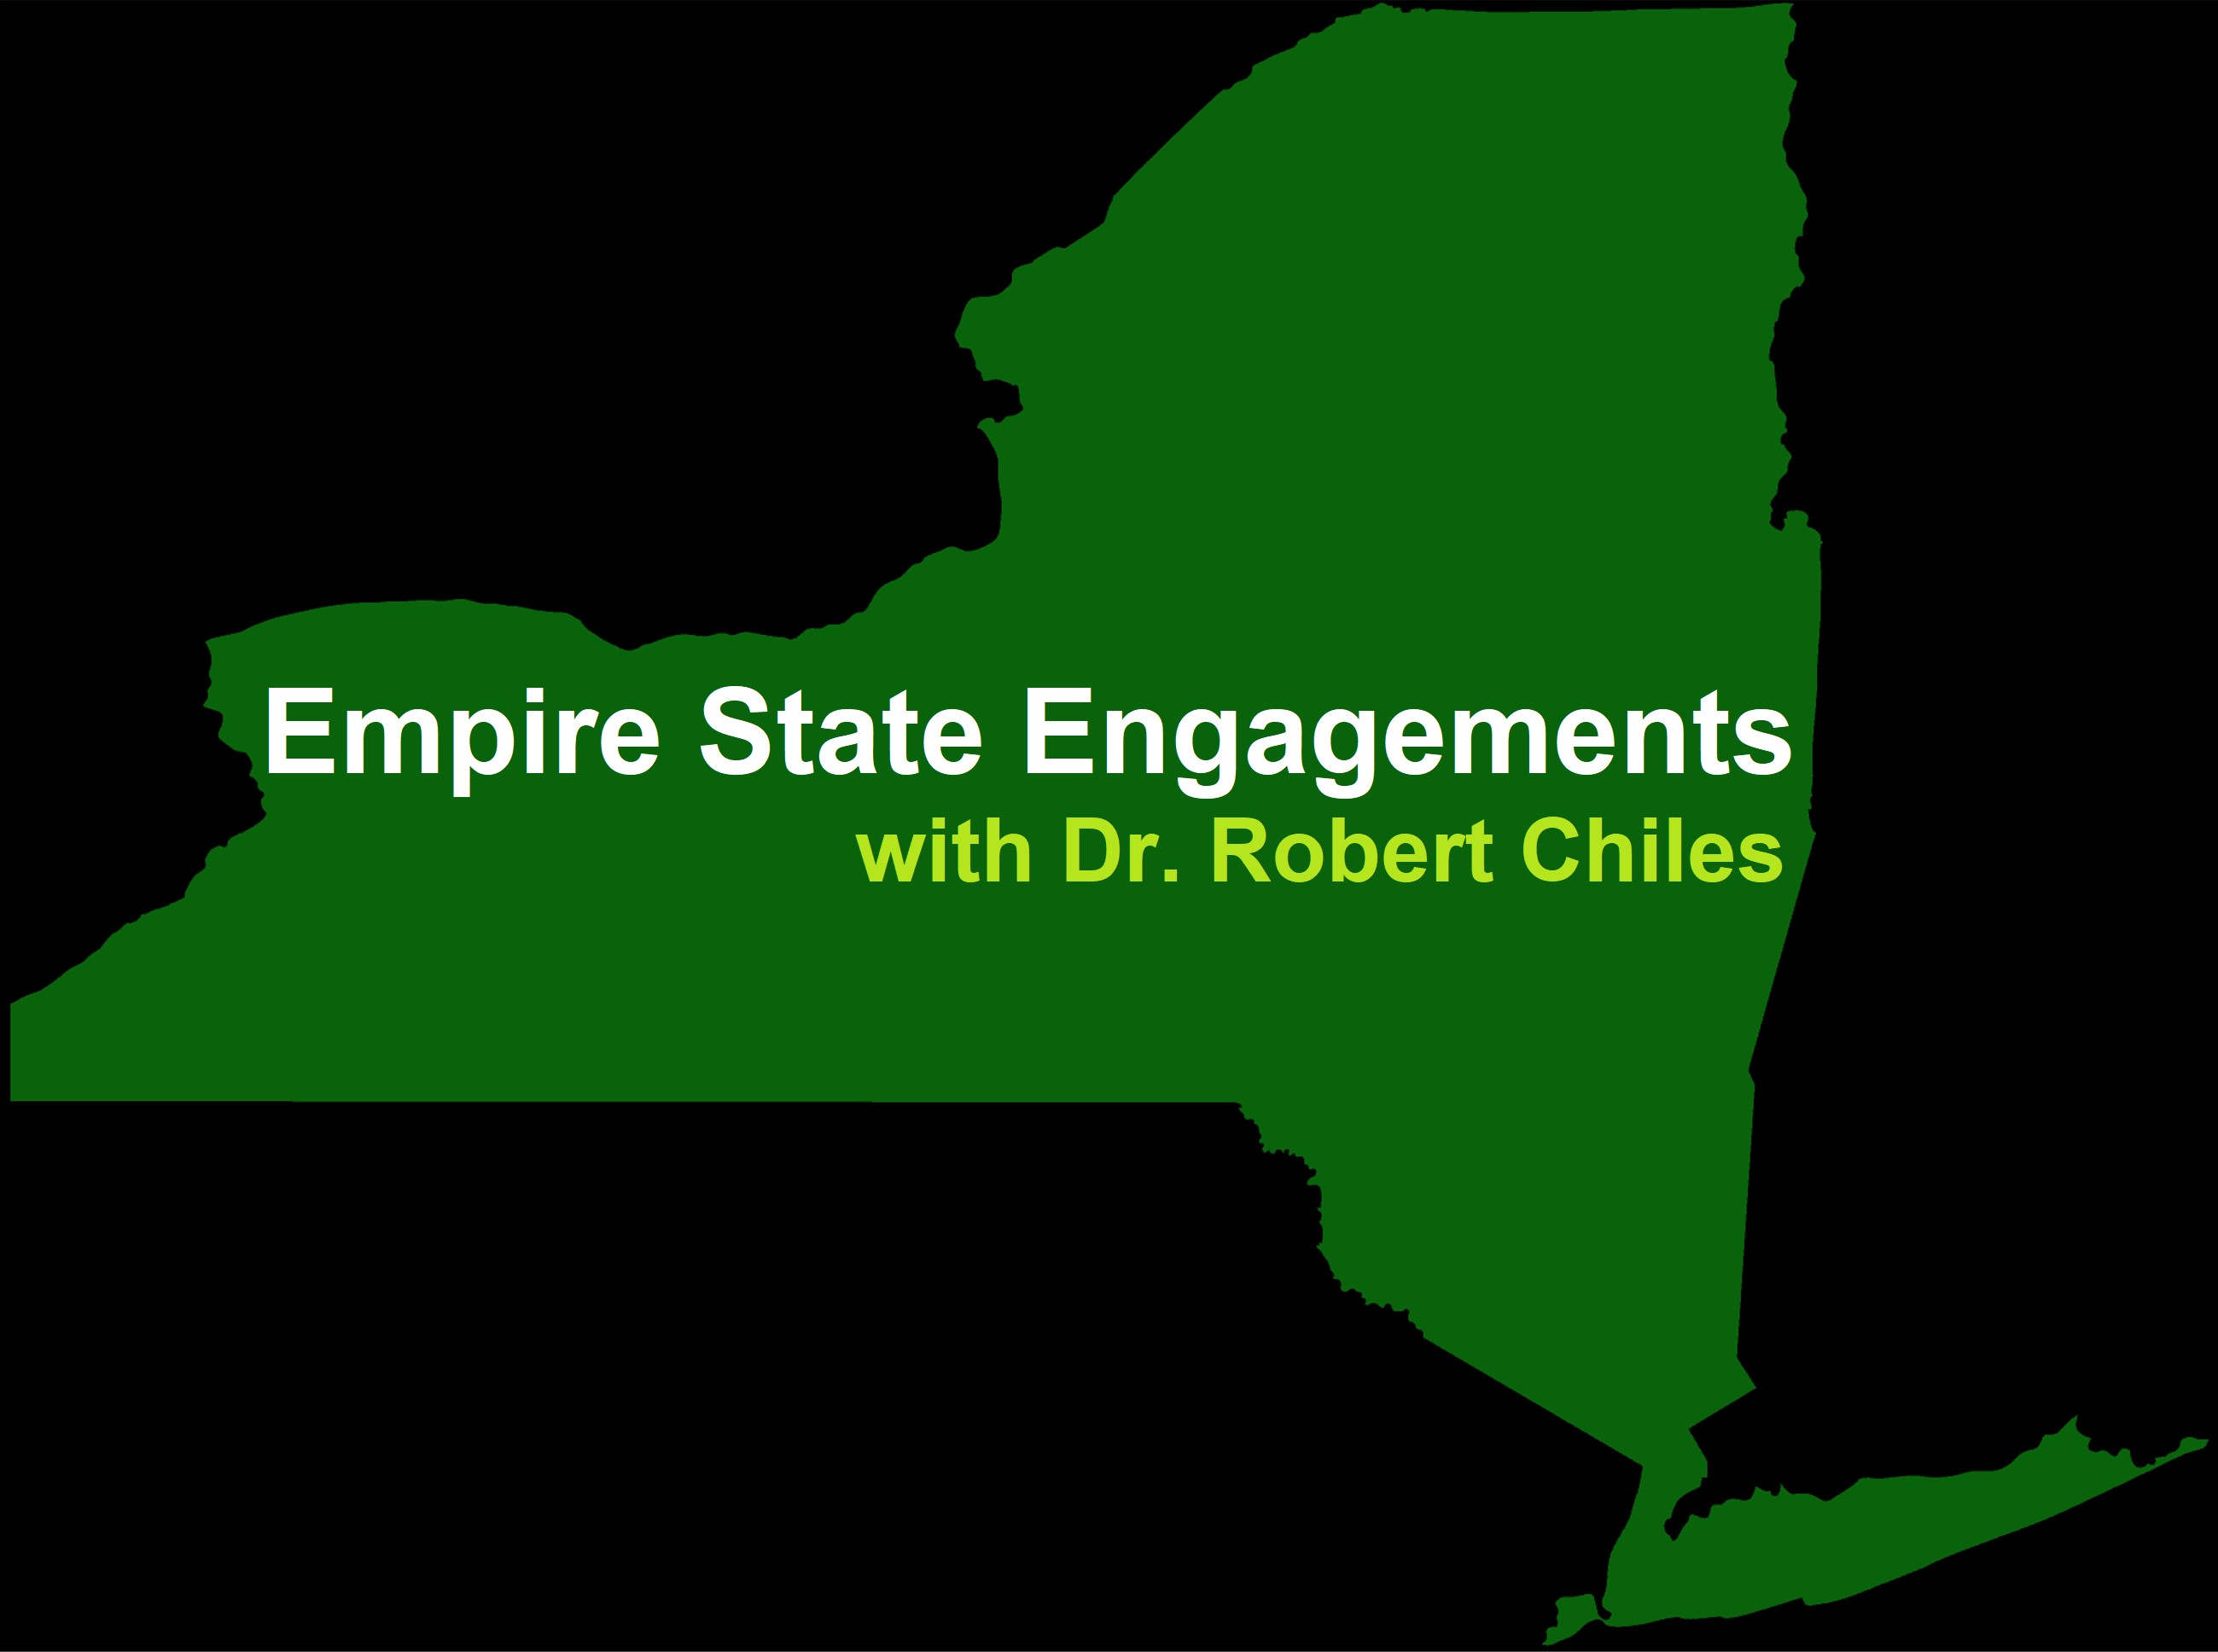 Empire State Engagements Show Logo - green NY state outline 